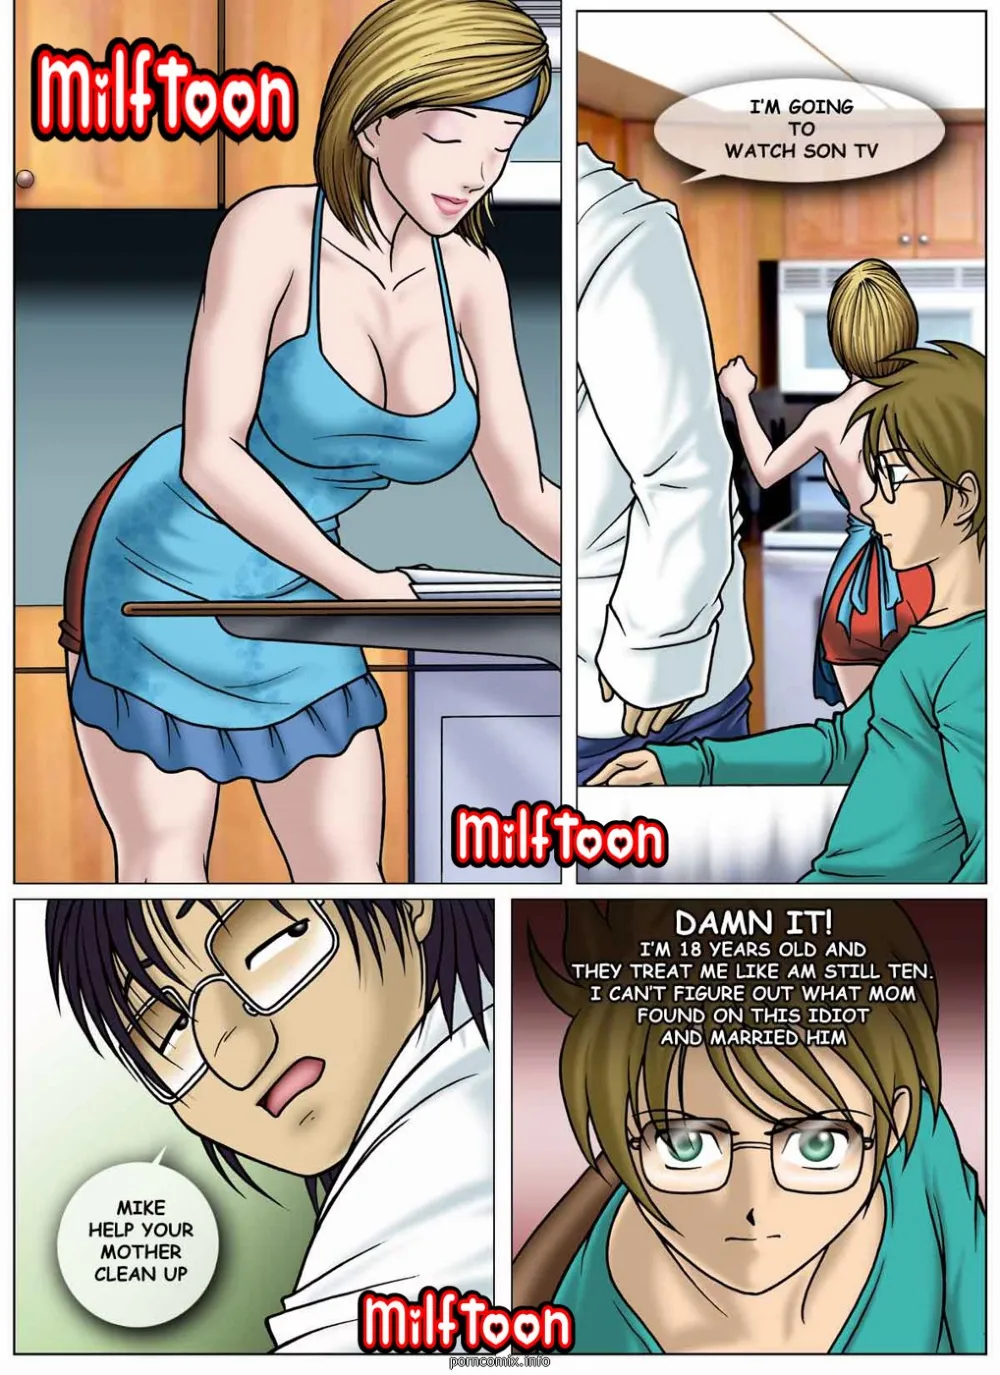 Milftoon- Suprizing - Page 1